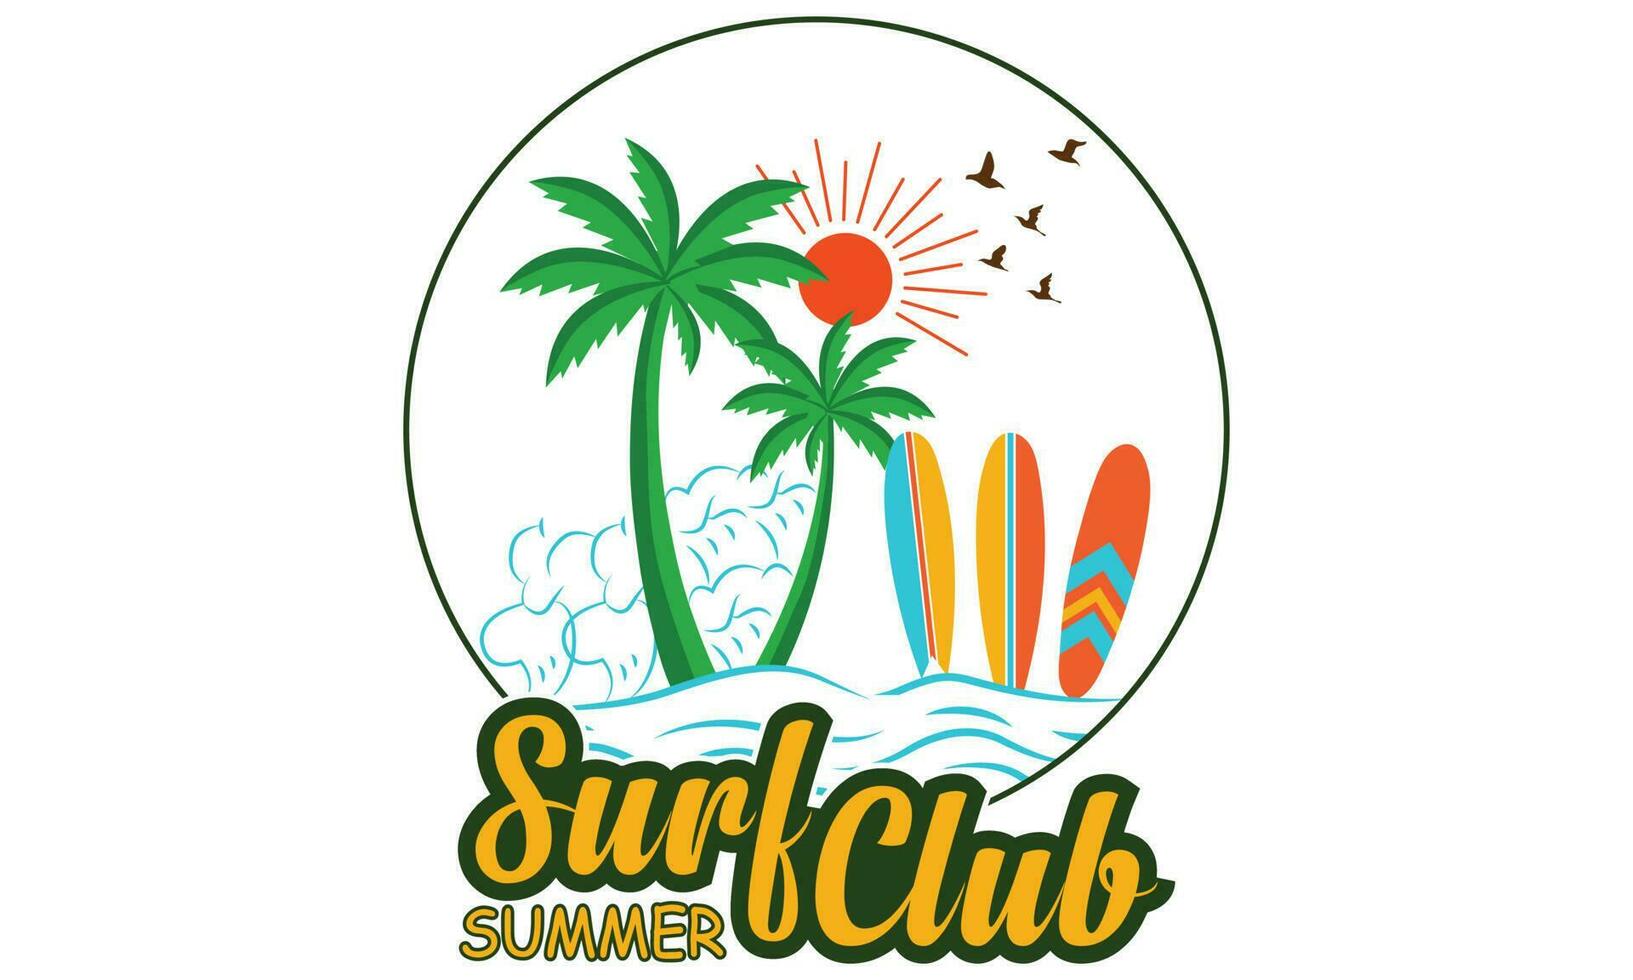 Summer Surfing T-shirt Template For Surf Club. Vintage Emblem In Retro Style. Surfboards, Waves And Hand Drawn Lettering Shirt, Beach, Surf, Surfing, Time For Surfing, Sun, Palm Tree, Beach Water vector